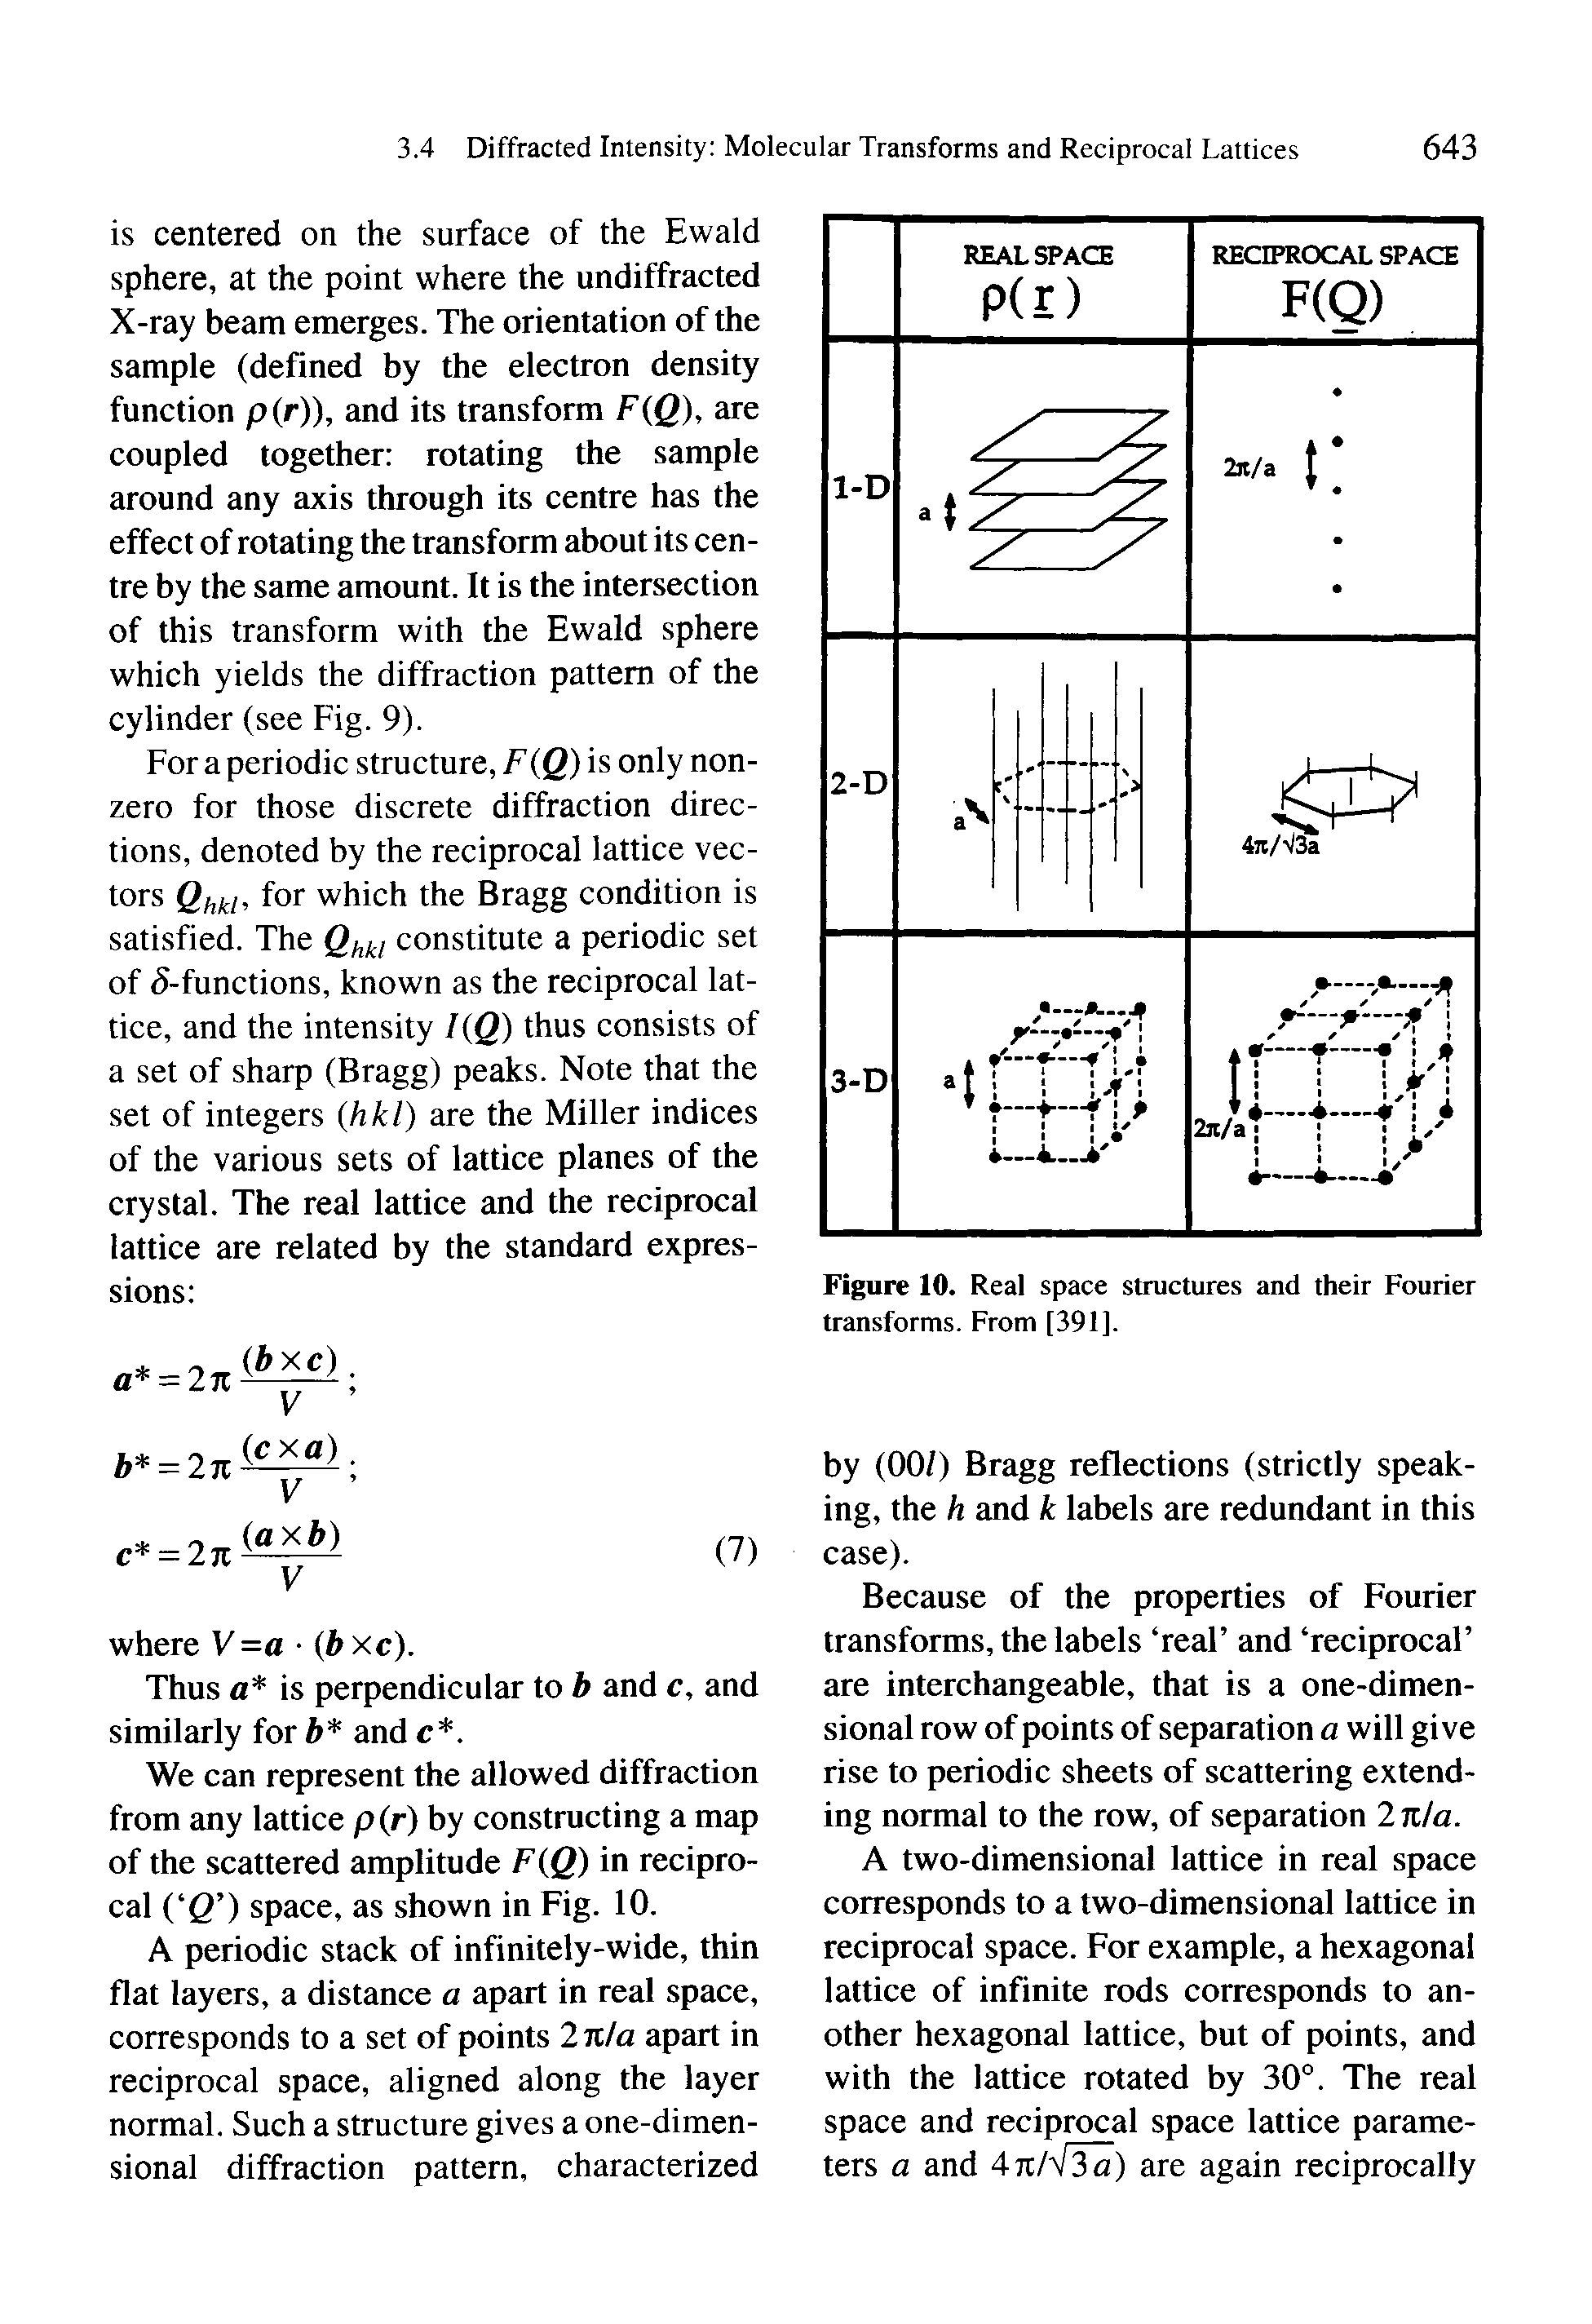 Figure 10. Real space structures and their Fourier transforms. From [391].